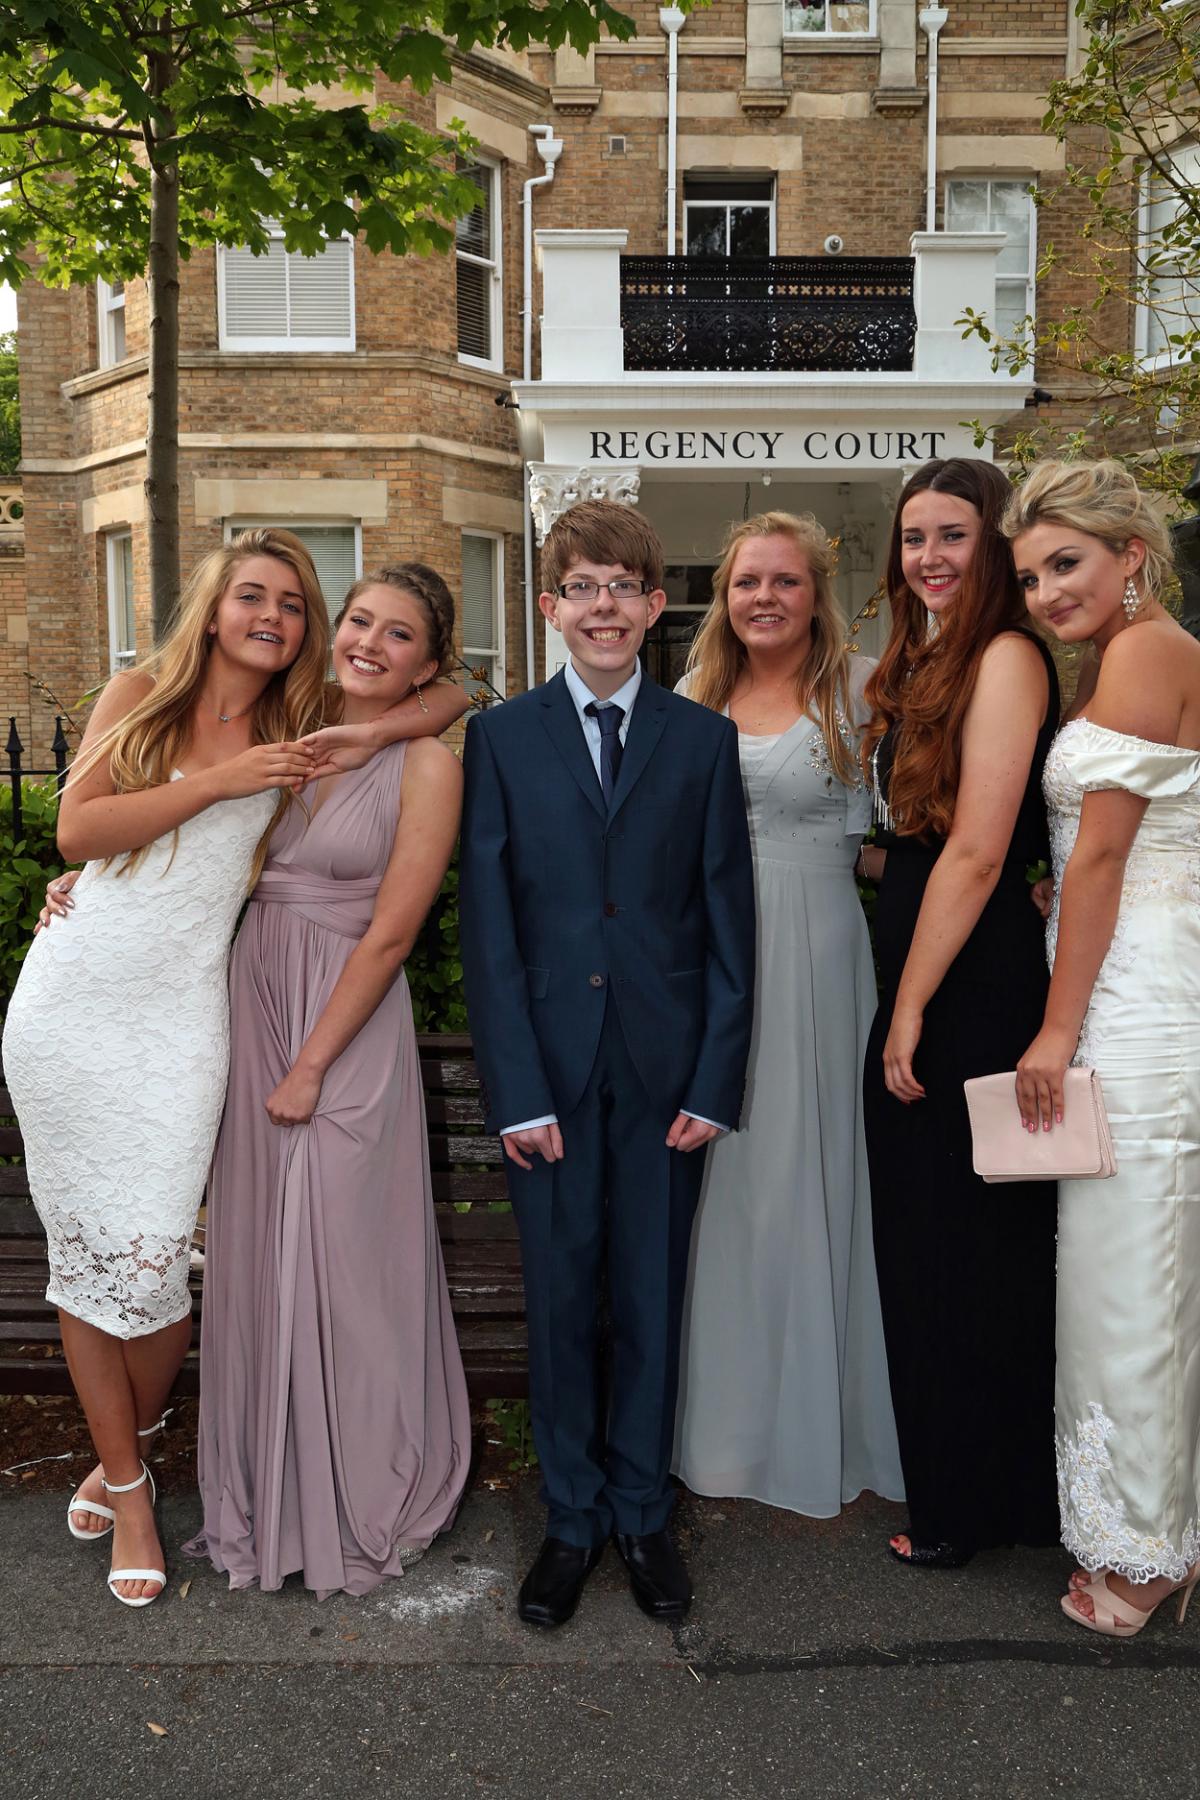 Highcliffe School Year 11 prom at the Carrington House Hotel on 24th June 2015. Pictures by Sally Adams 